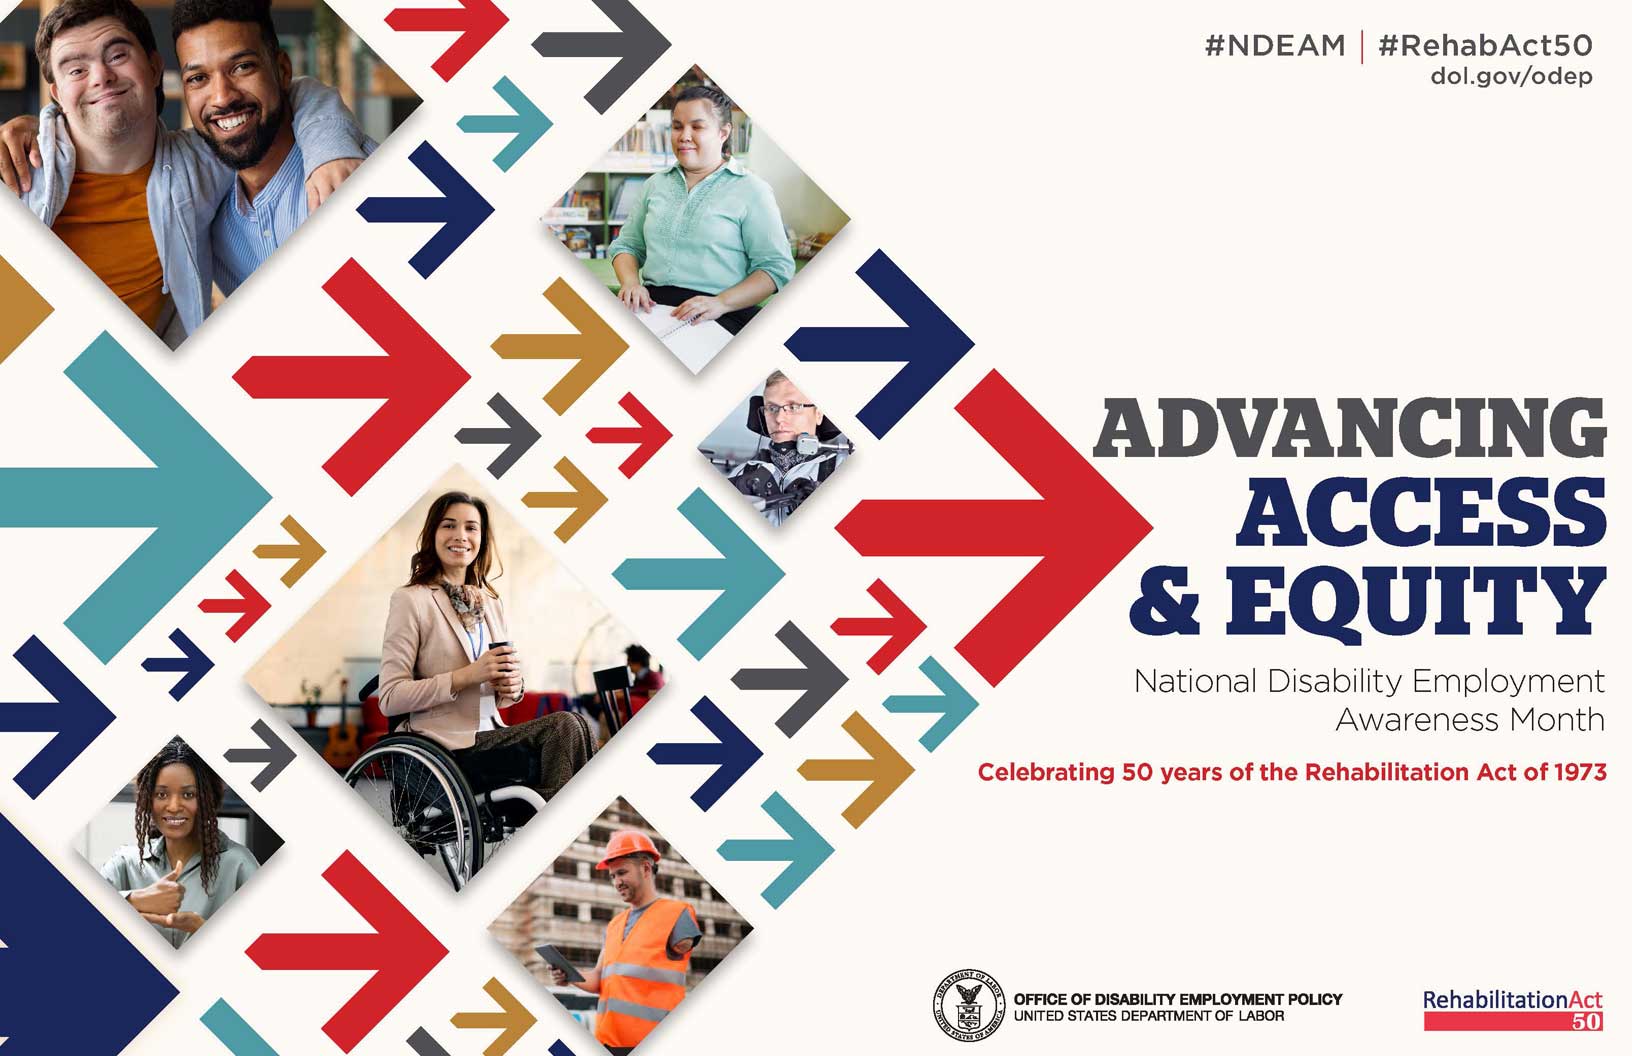 The poster is rectangular in shape with a white background. The words, “Advancing Access & Equity, National Disability Employment Awareness Month, Celebrating 50 years of the Rehabilitation Act of 1973” are placed to the right of a field of red, gray, teal, blue and yellow arrows. Mixed within the arrows are diverse images of people with disabilities in workplace settings. Along the top in small gray letters are the hashtags “NDEAM” and “RehabAct50” followed by the website address, dol.gov/ODEP. In the lower right corner is the DOL seal followed by the words “Office of Disability Employment Policy, United States Department of Labor” as well as the Rehabilitation Act 50 logo